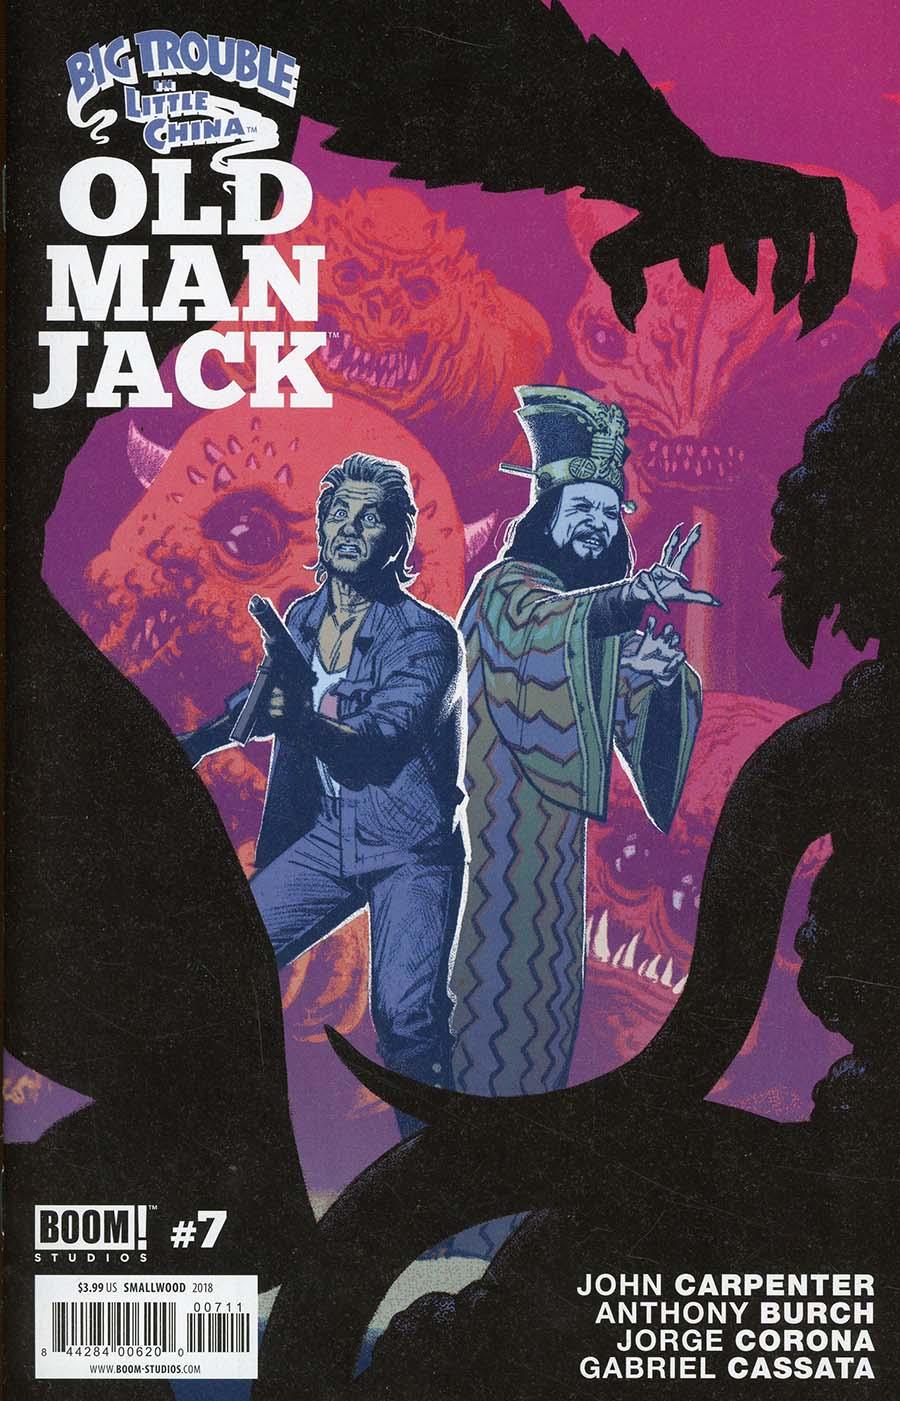 Big Trouble In Little China Old Man Jack Vol. 1 #7